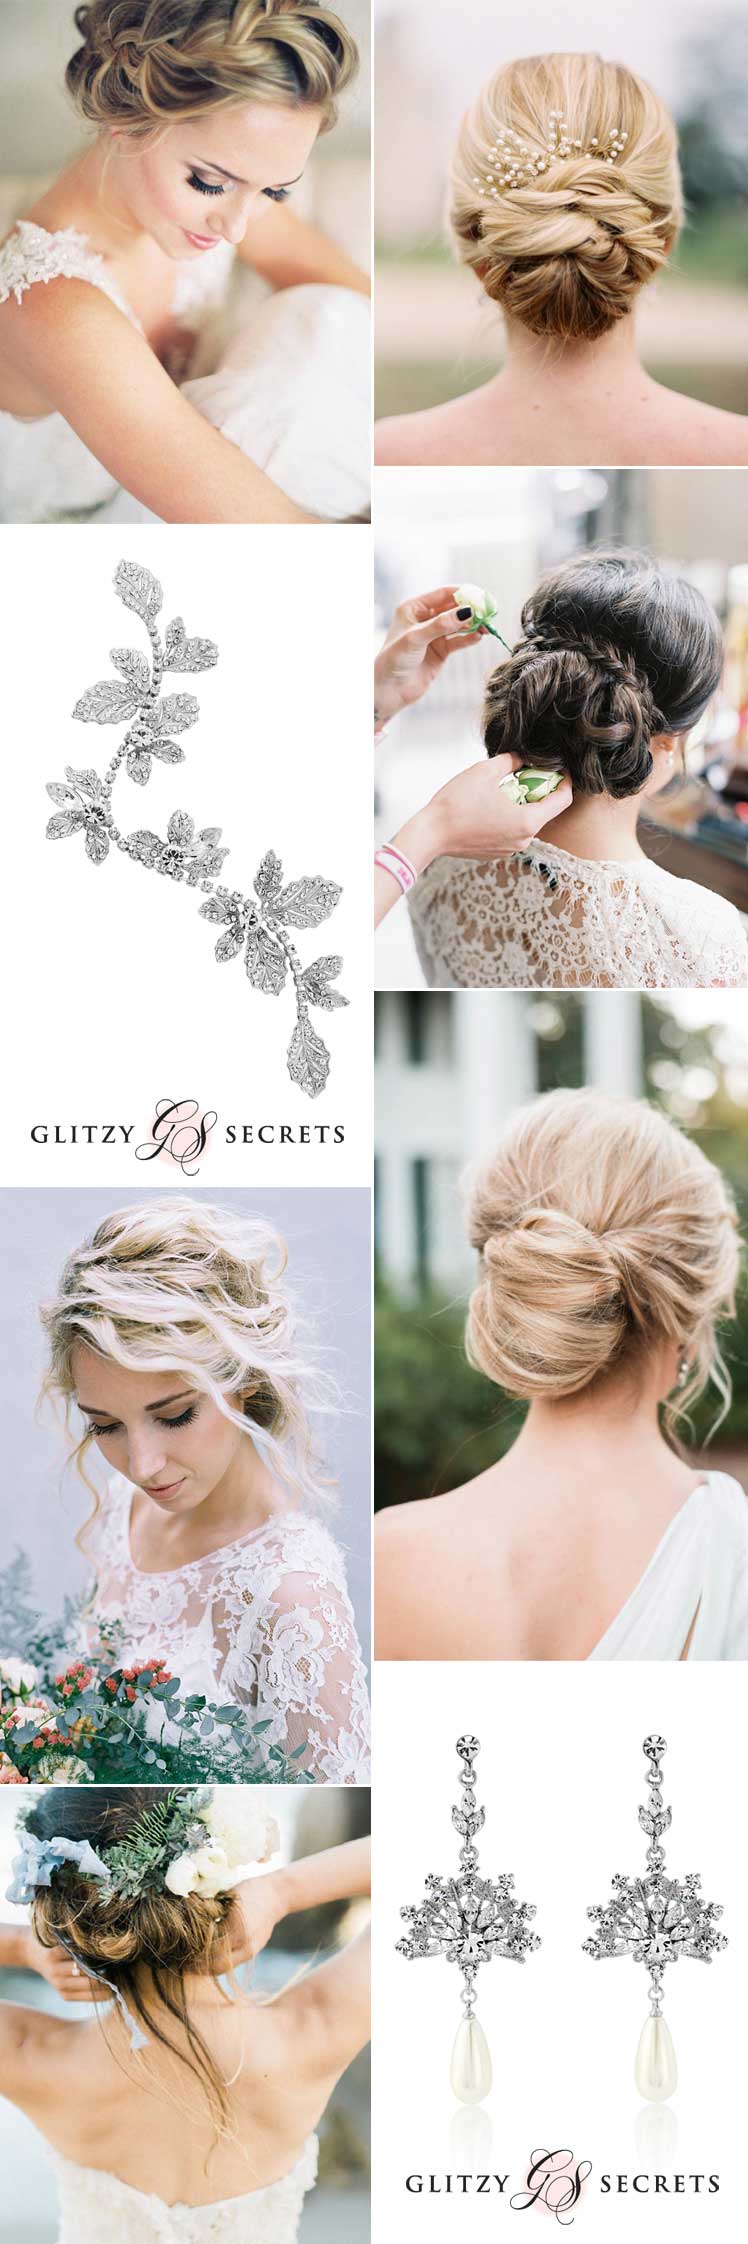 Flattering up-do bridal hairstyle ideas